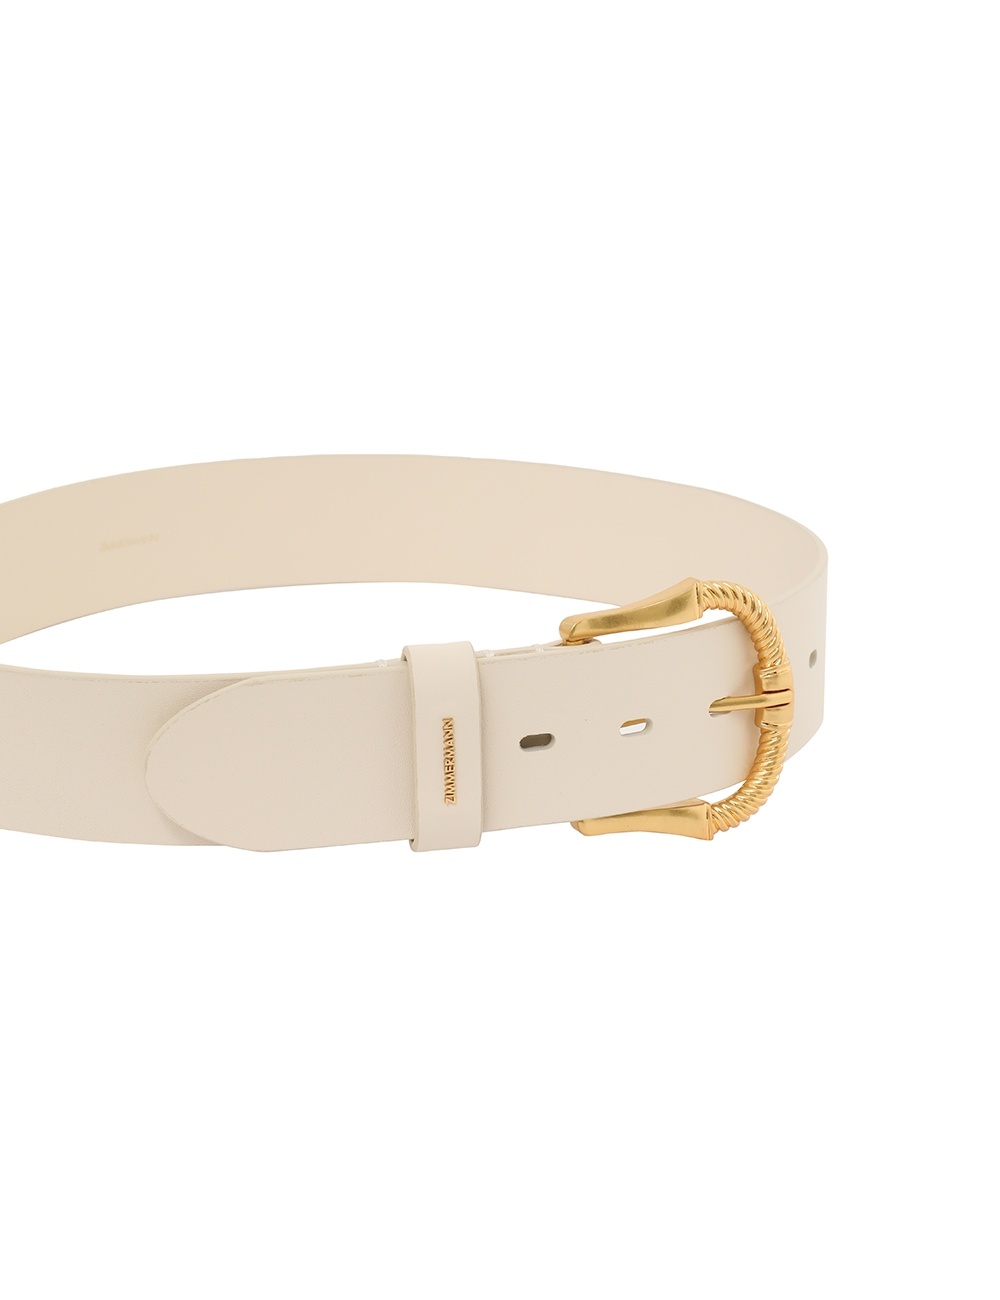 TWISTED BUCKLE LEATHER BELT 40 - 4